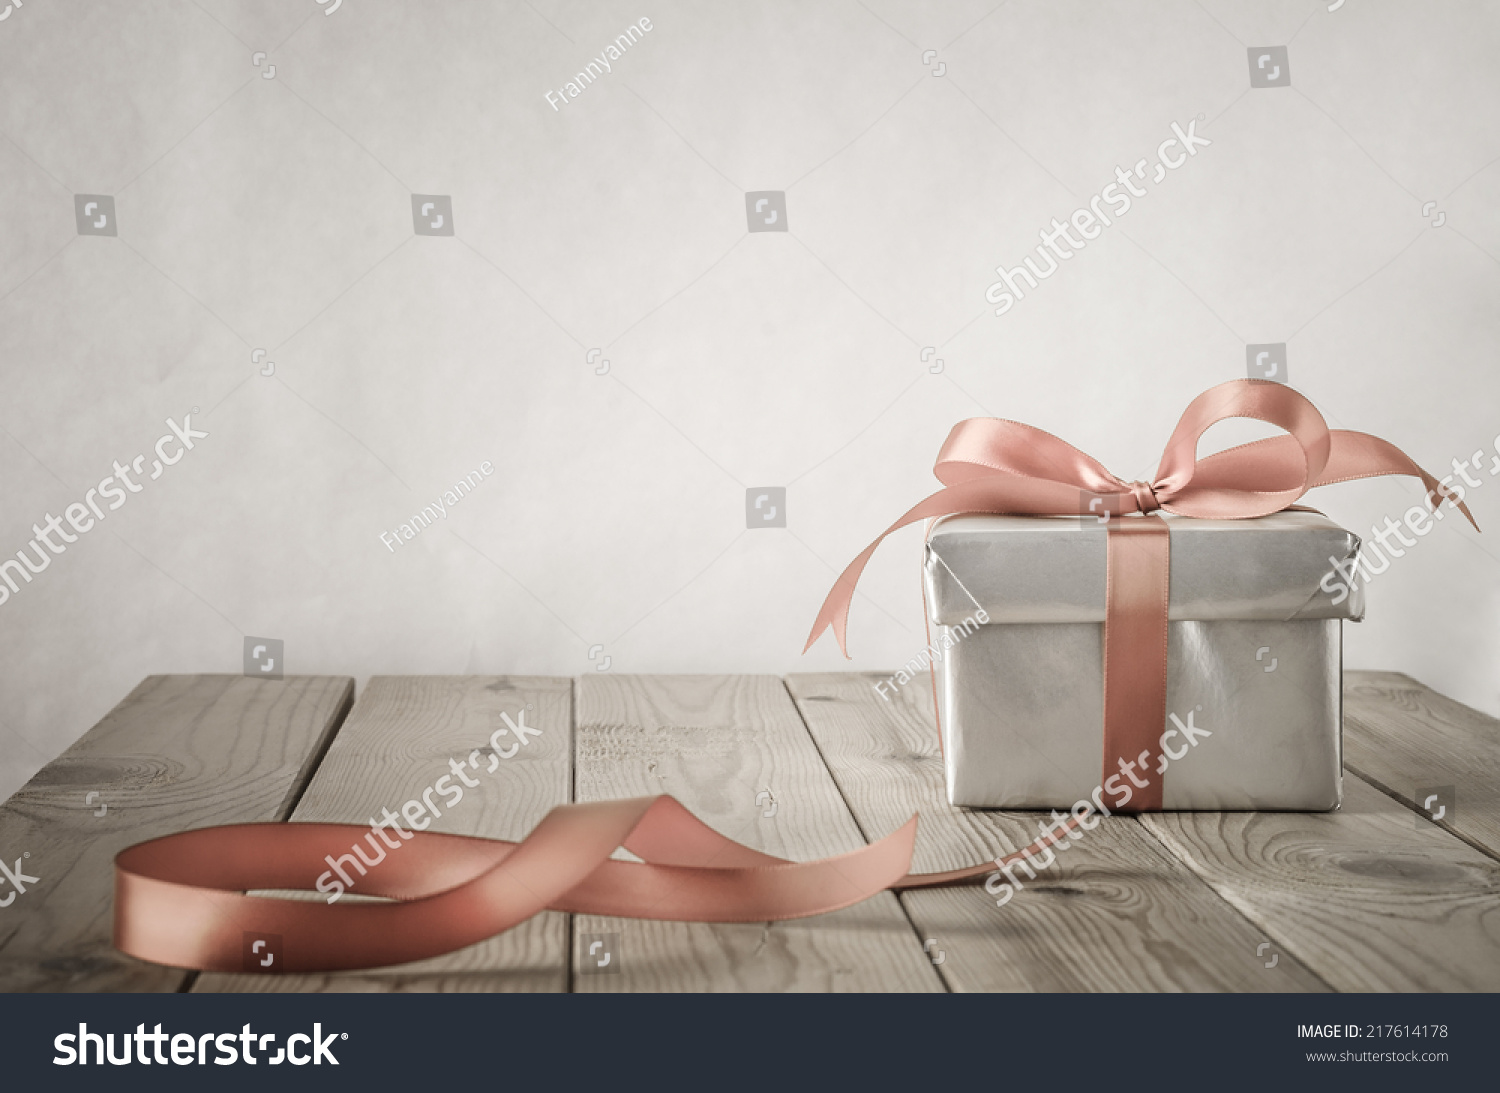 A gift box with closed lid, wrapped in silver paper and tied to a bow with a satin ribbon.  Placed on a weathered old wooden table with copy space behind and above. Cut ribbon remnant to the side.  #217614178